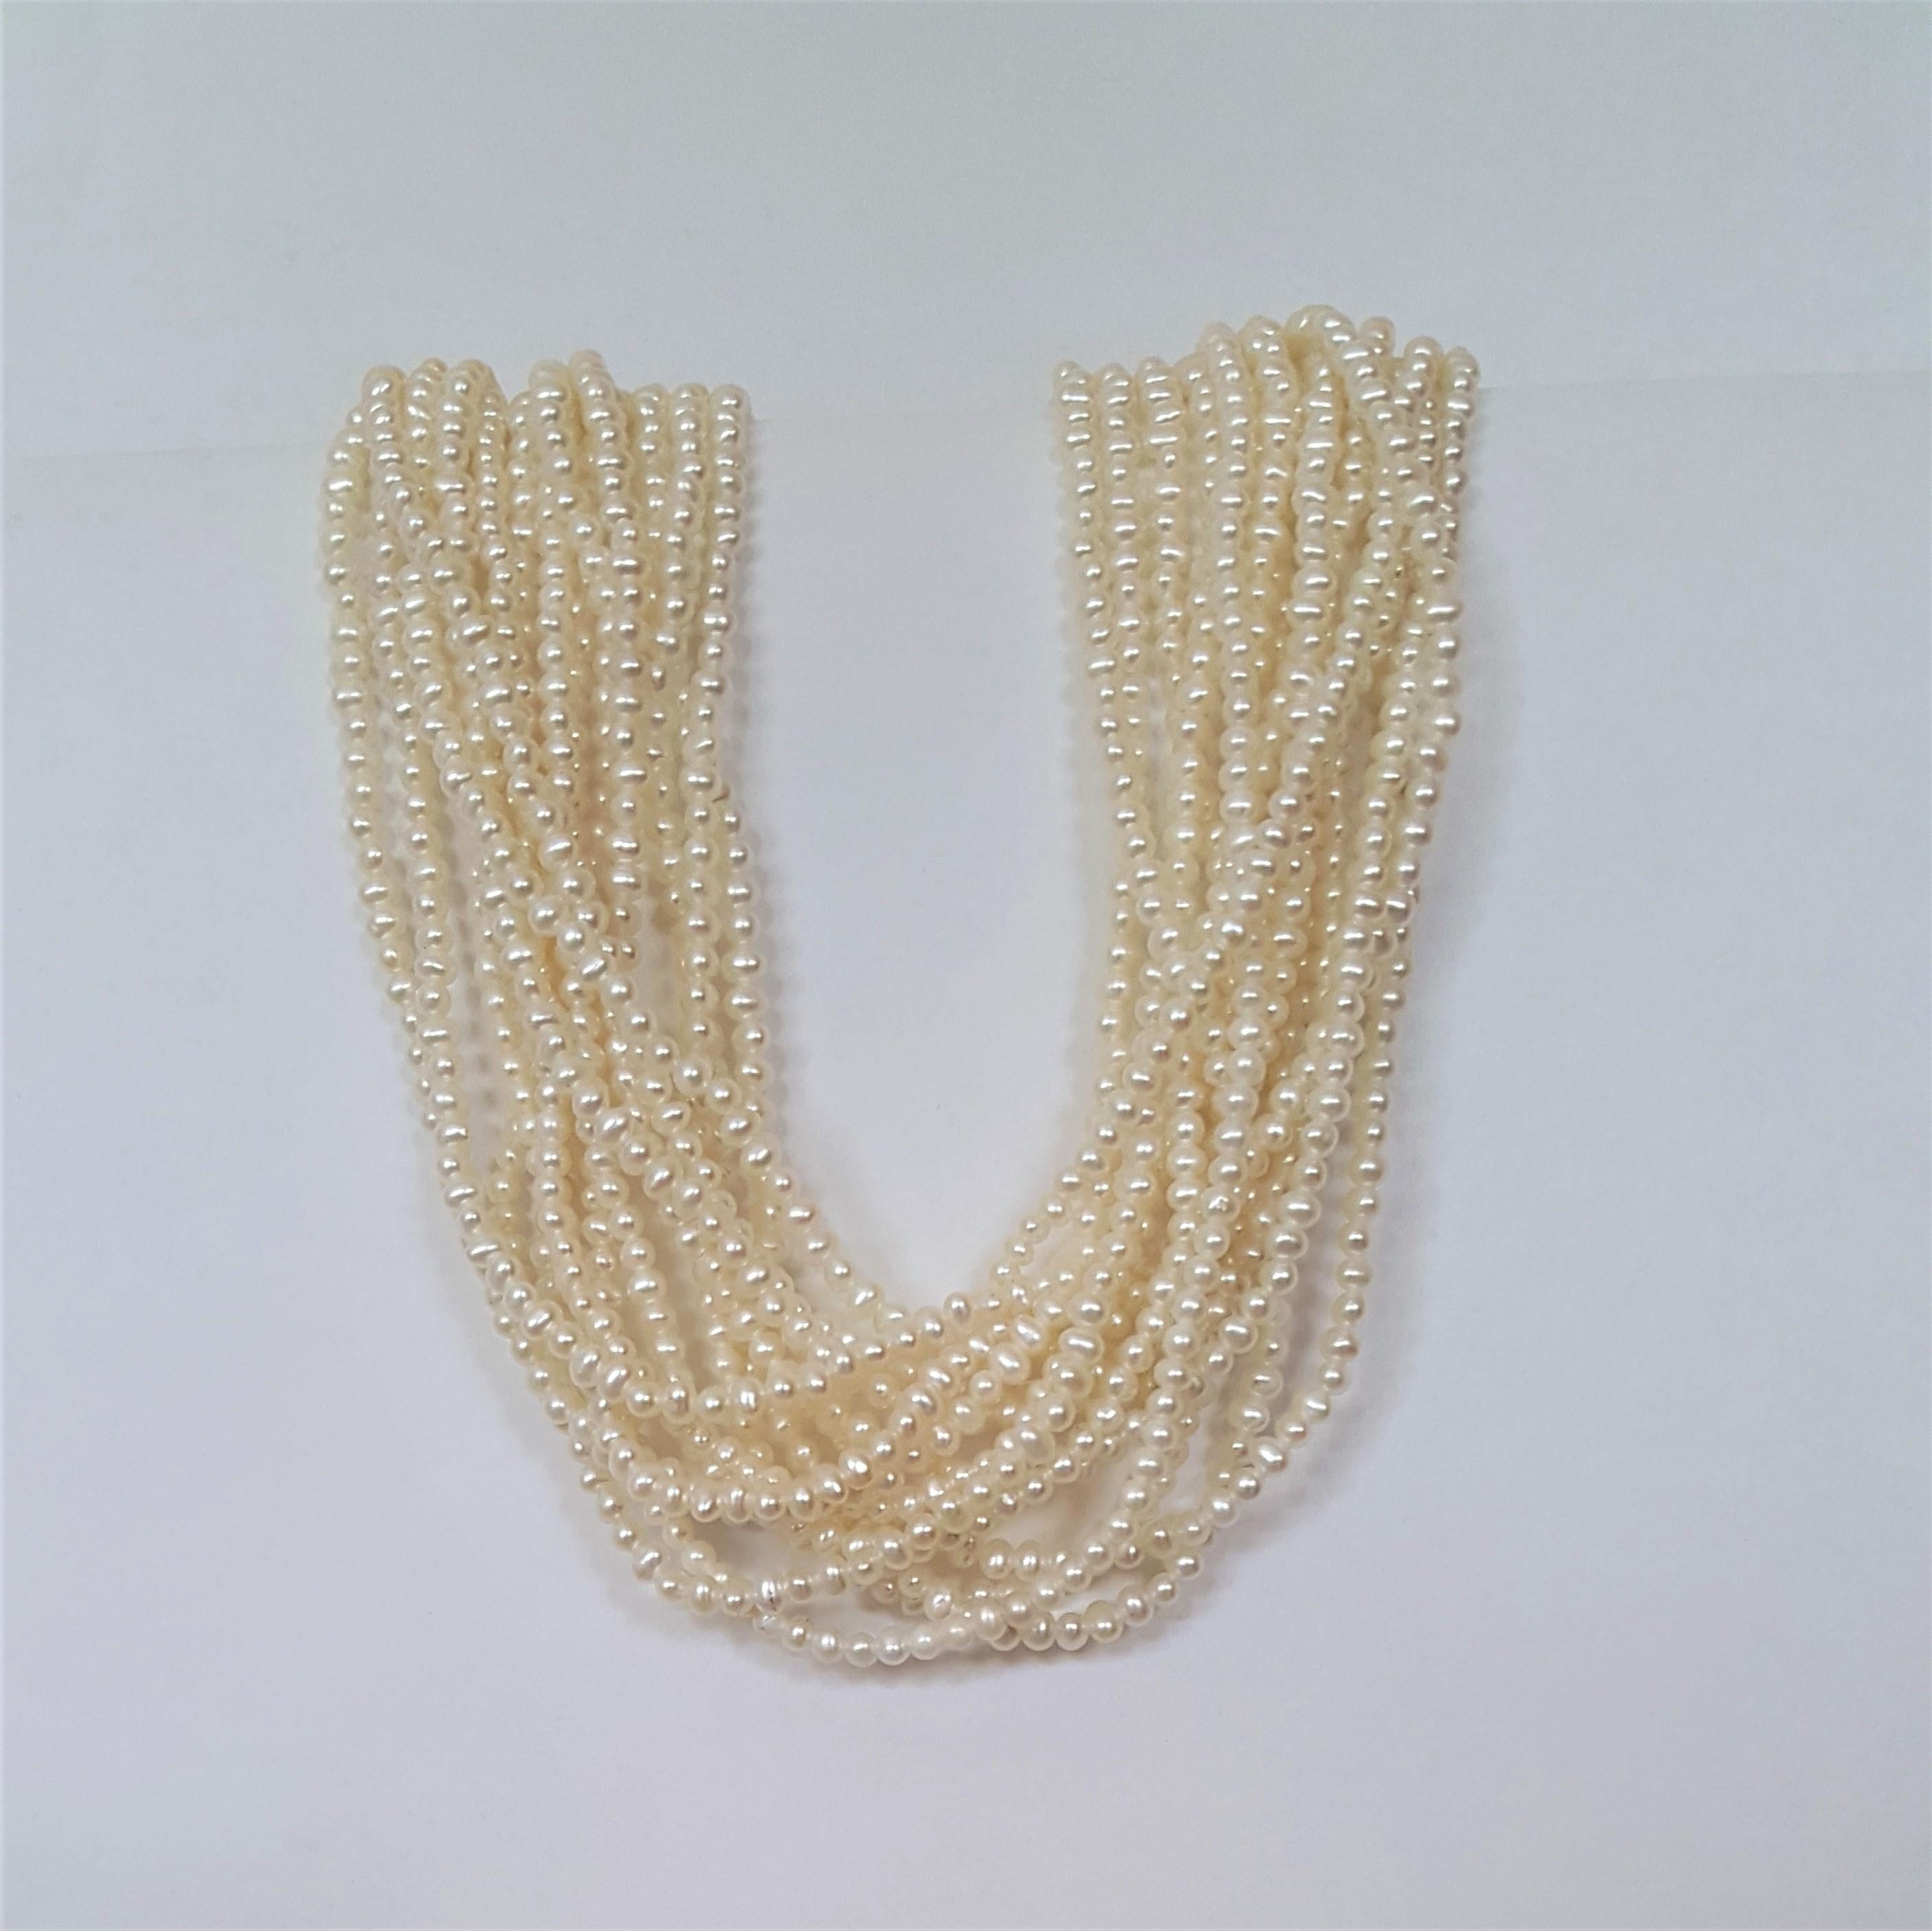 Round Cut Cream White Grade AA Pearl Necklace Multi-Strand 14kt Butterfly Clasp, 20 Inches